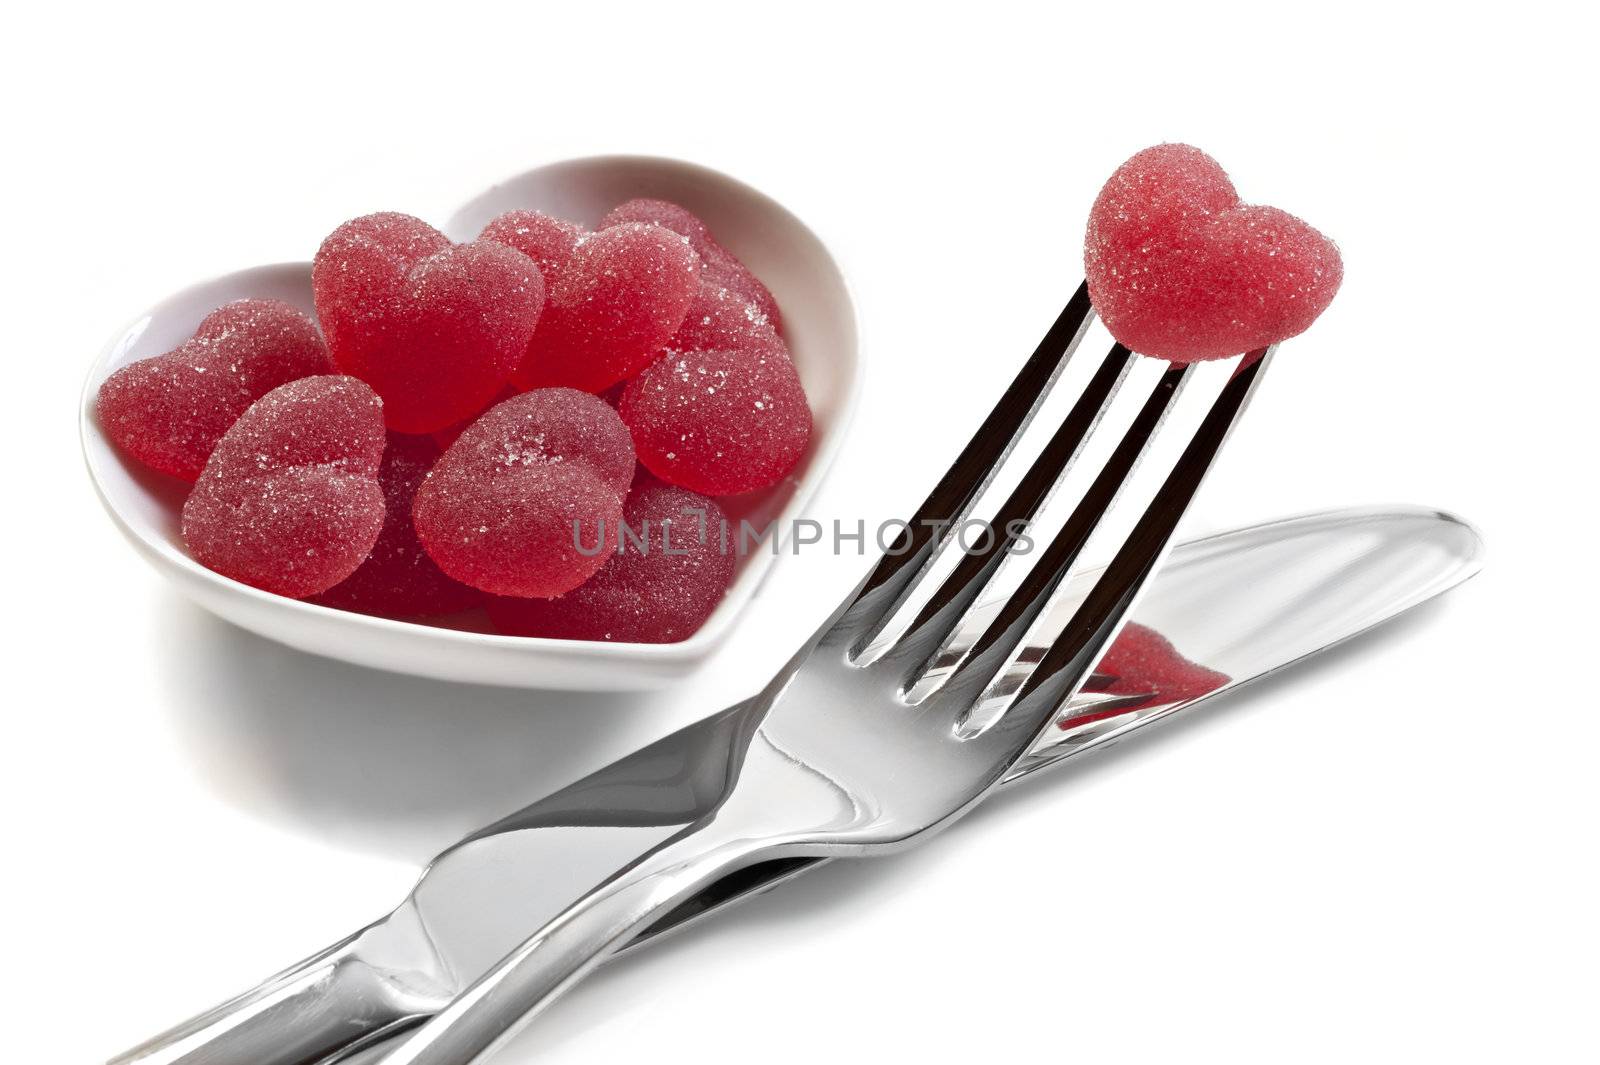 Red heart shaped jelly sweets with knife and fork on white background